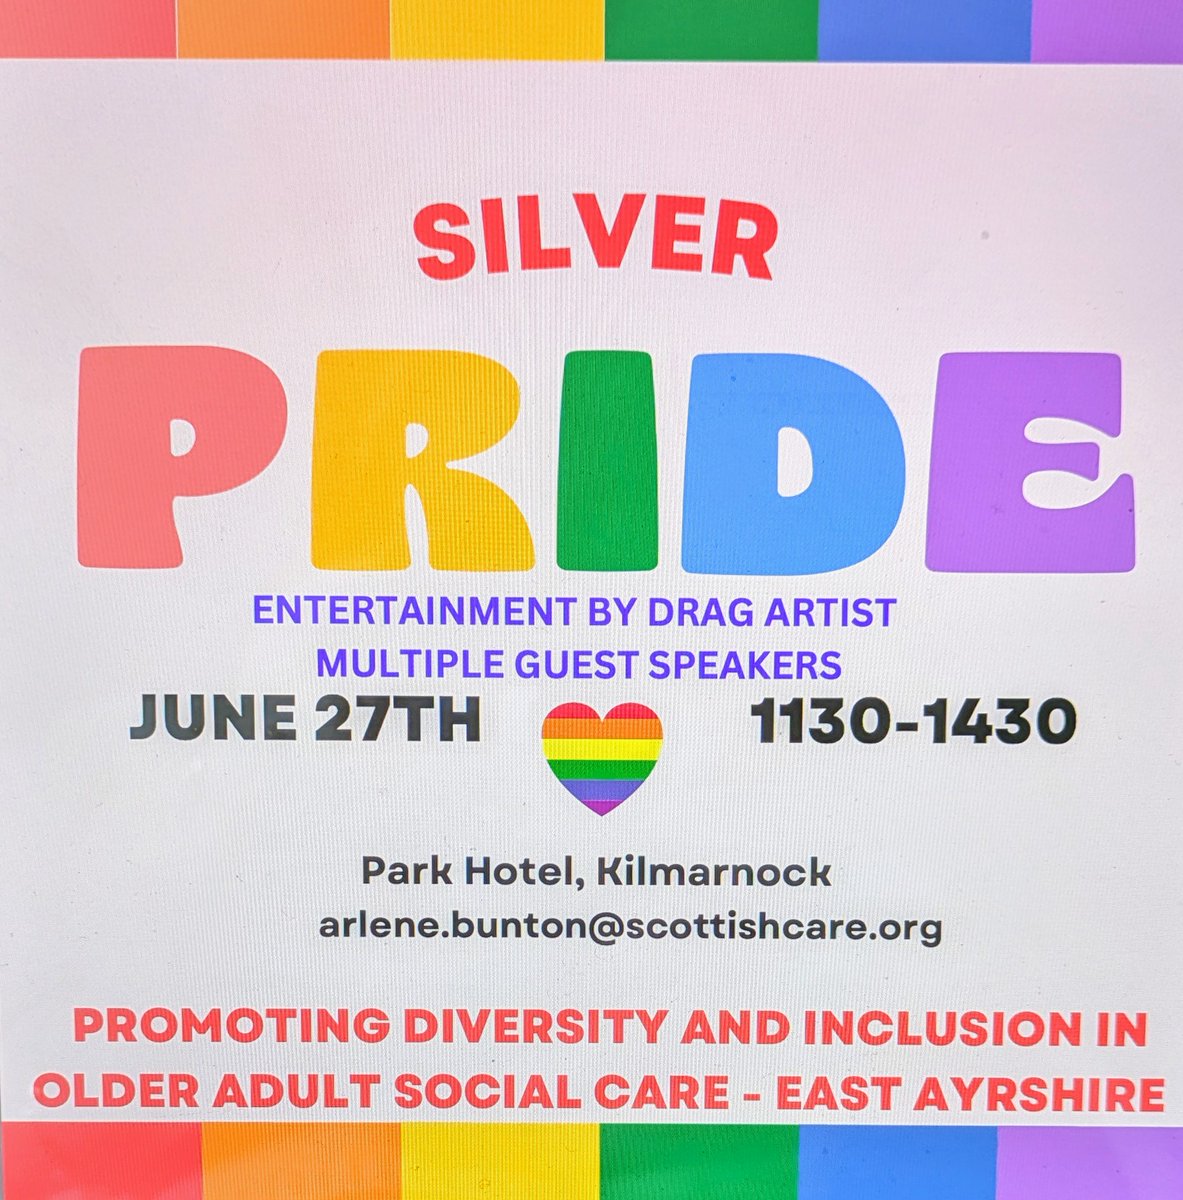 Absolutely delighted to get the call today that East Ayrshire Silver Pride event and training is being fully funded by @TNLUK ! So grateful that they agreed to support us to celebrate wonderfully inclusive and diverse people we have working in and supported by Social Care 😊